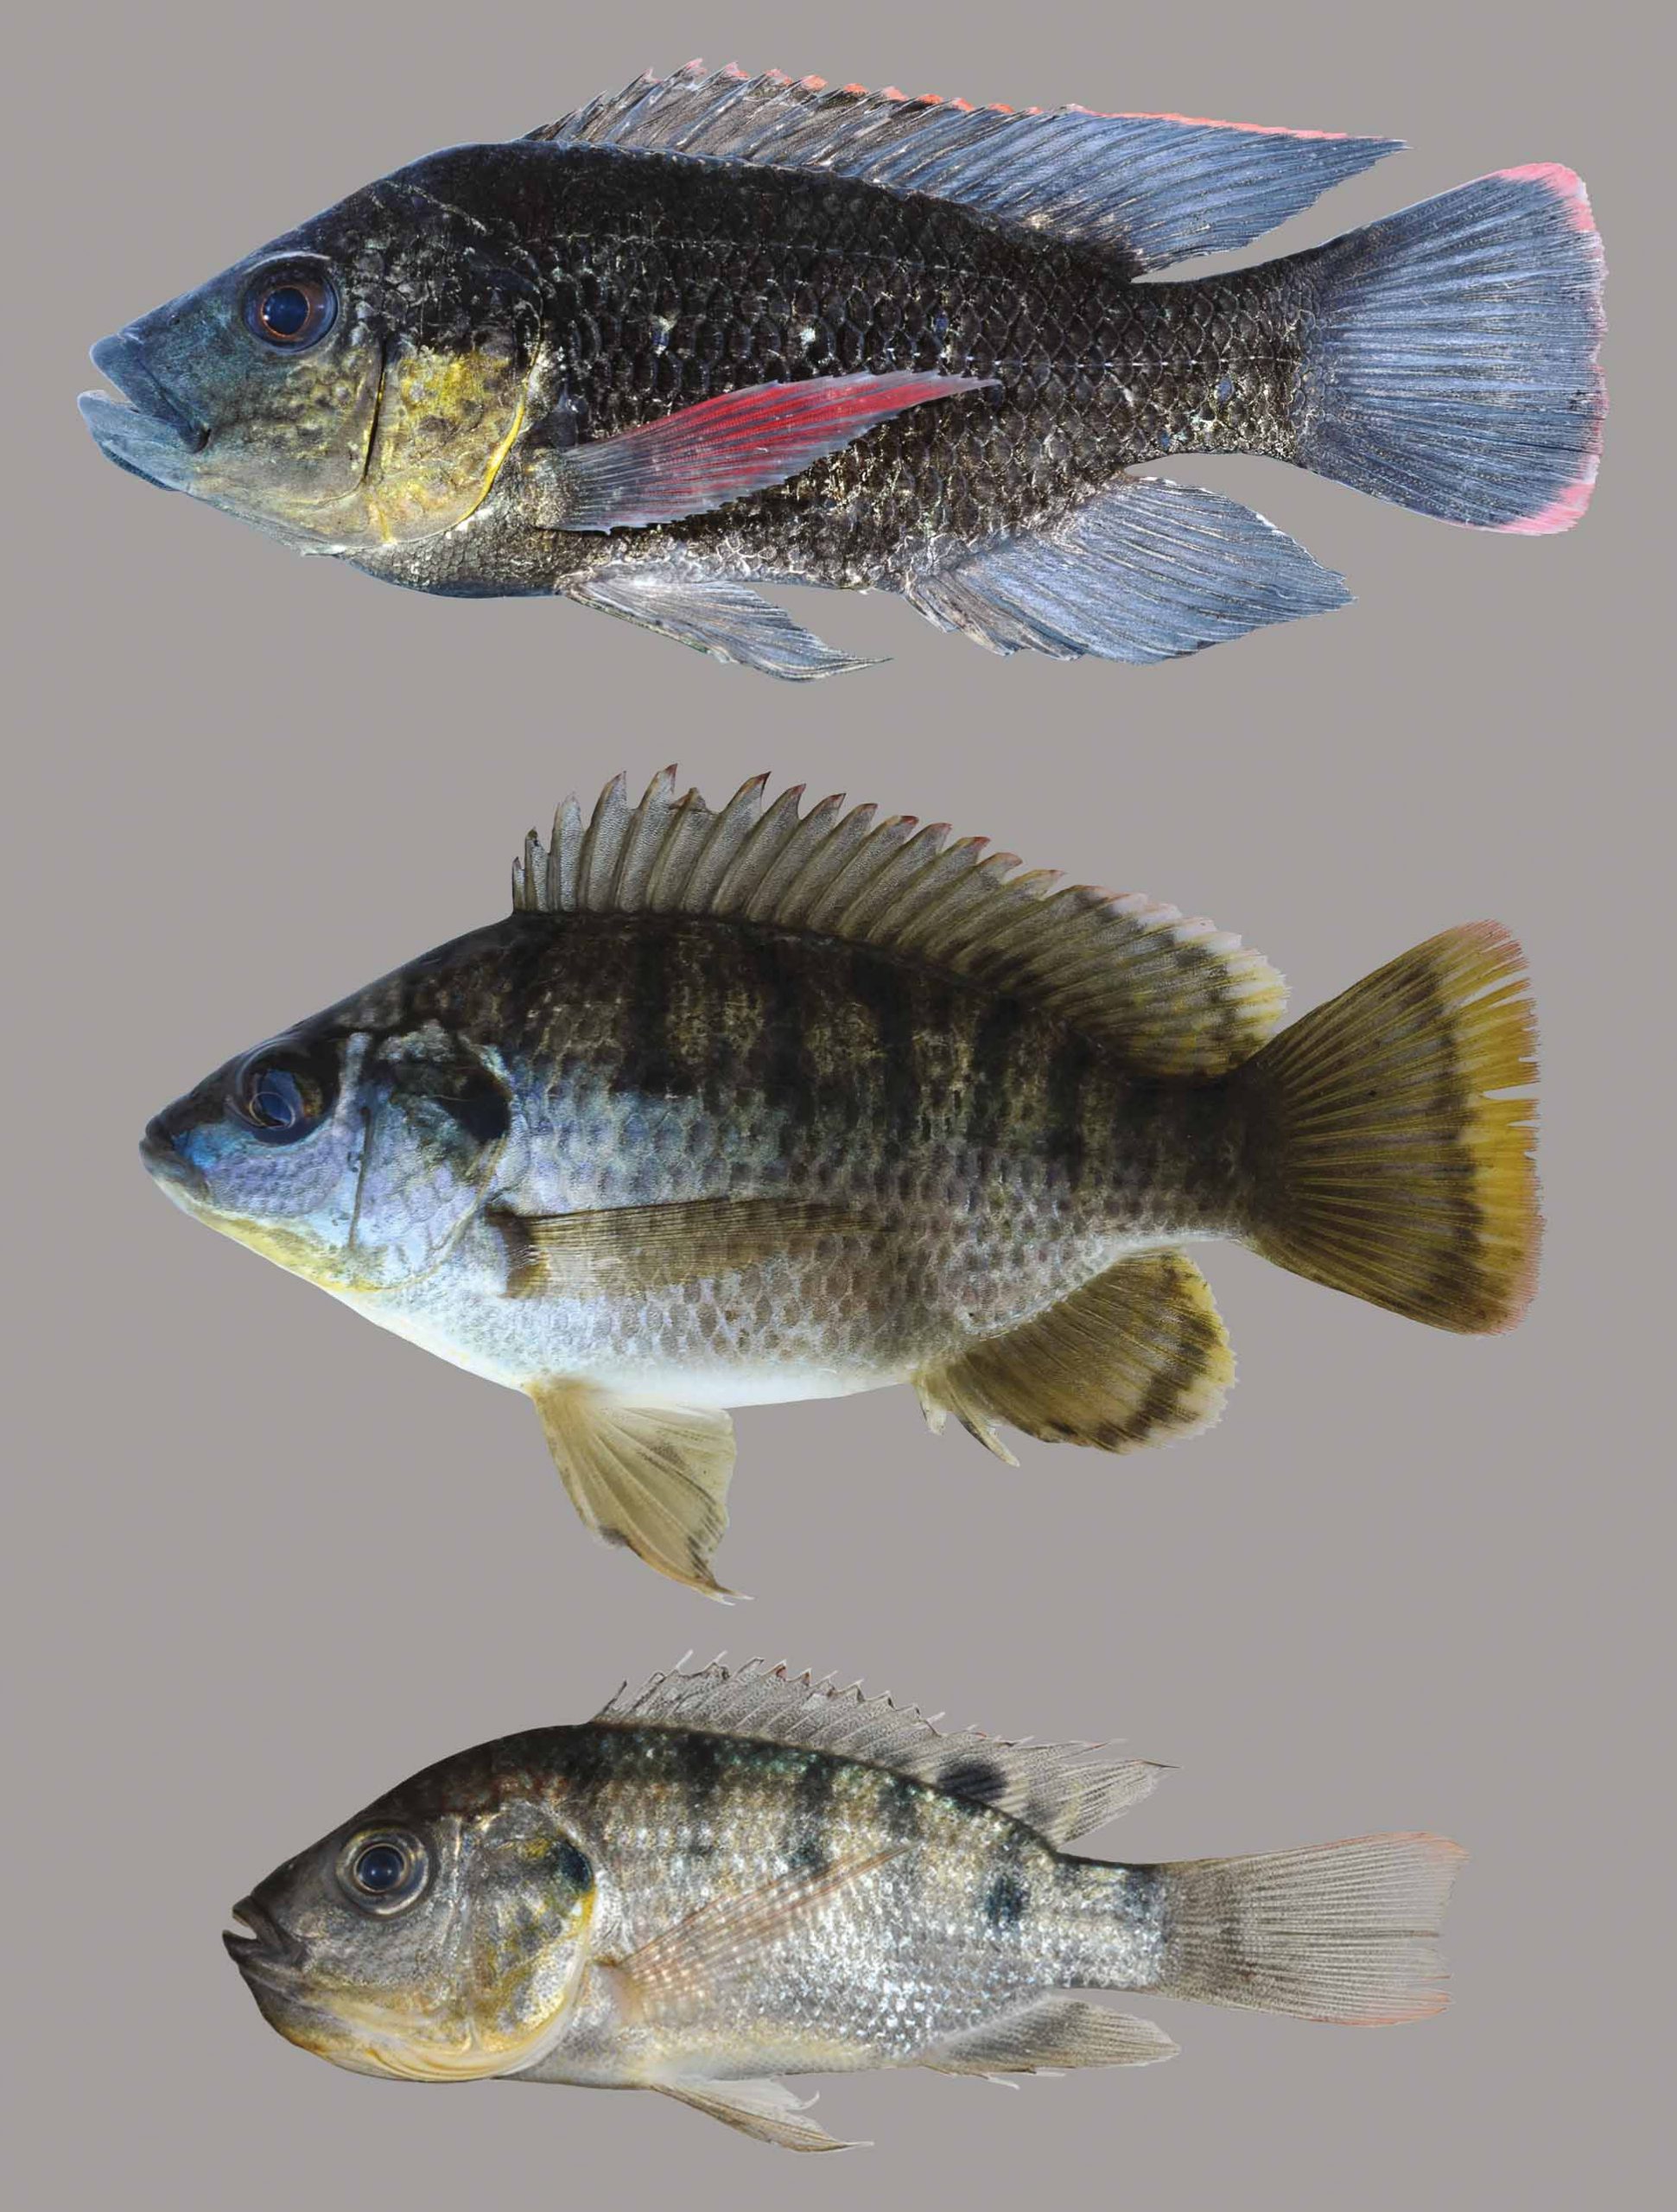 Lateral view of Mozambique tilapia